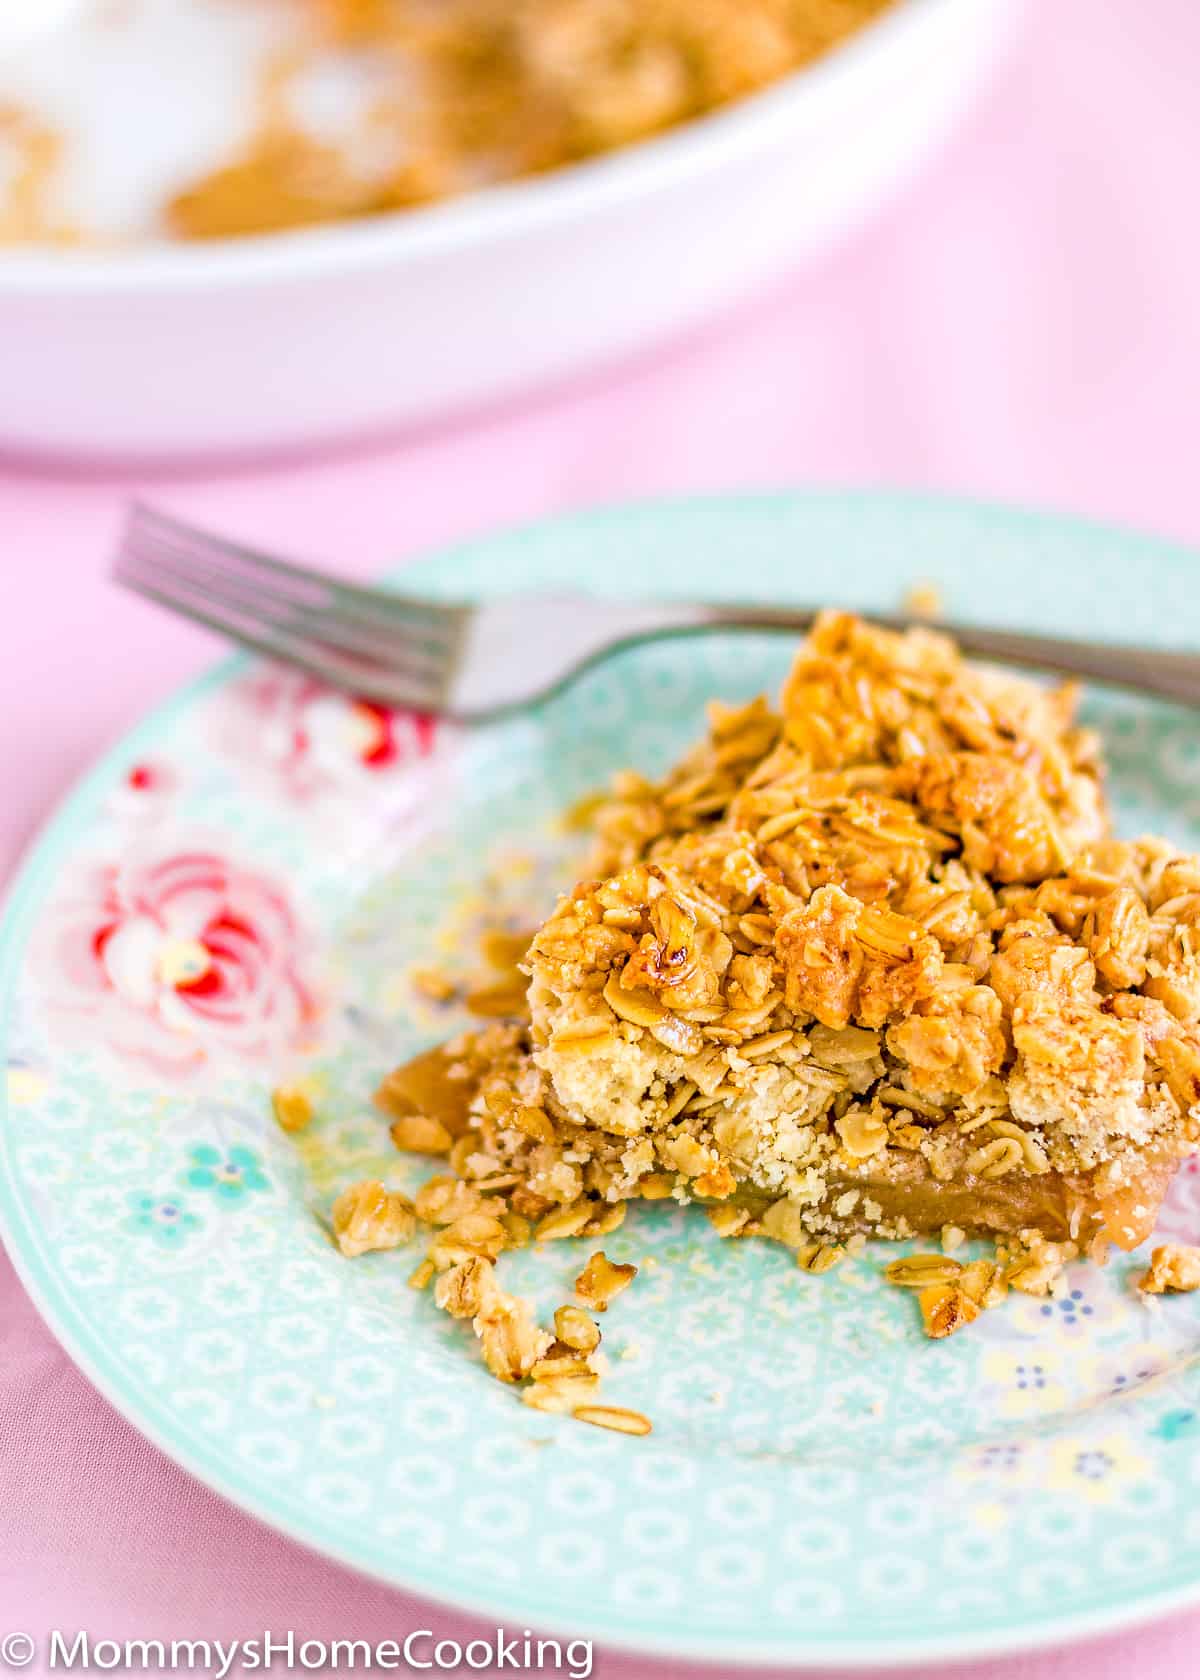 Eggless Apple Crumble with Oats in a blue plate